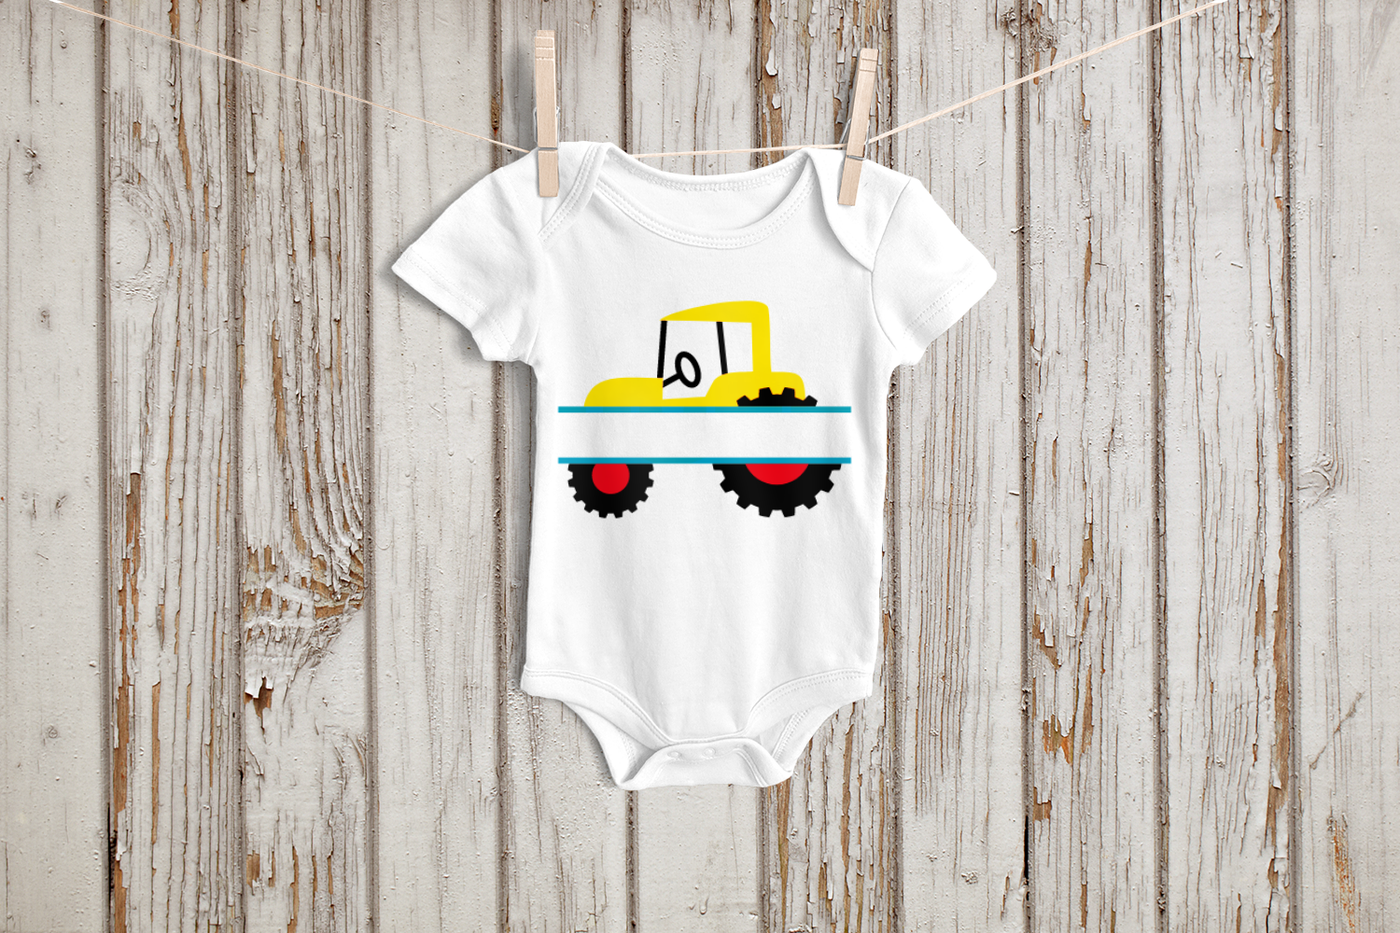 A white baby onesie hanging on a clothesline. On it is a tractor design split in the middle.